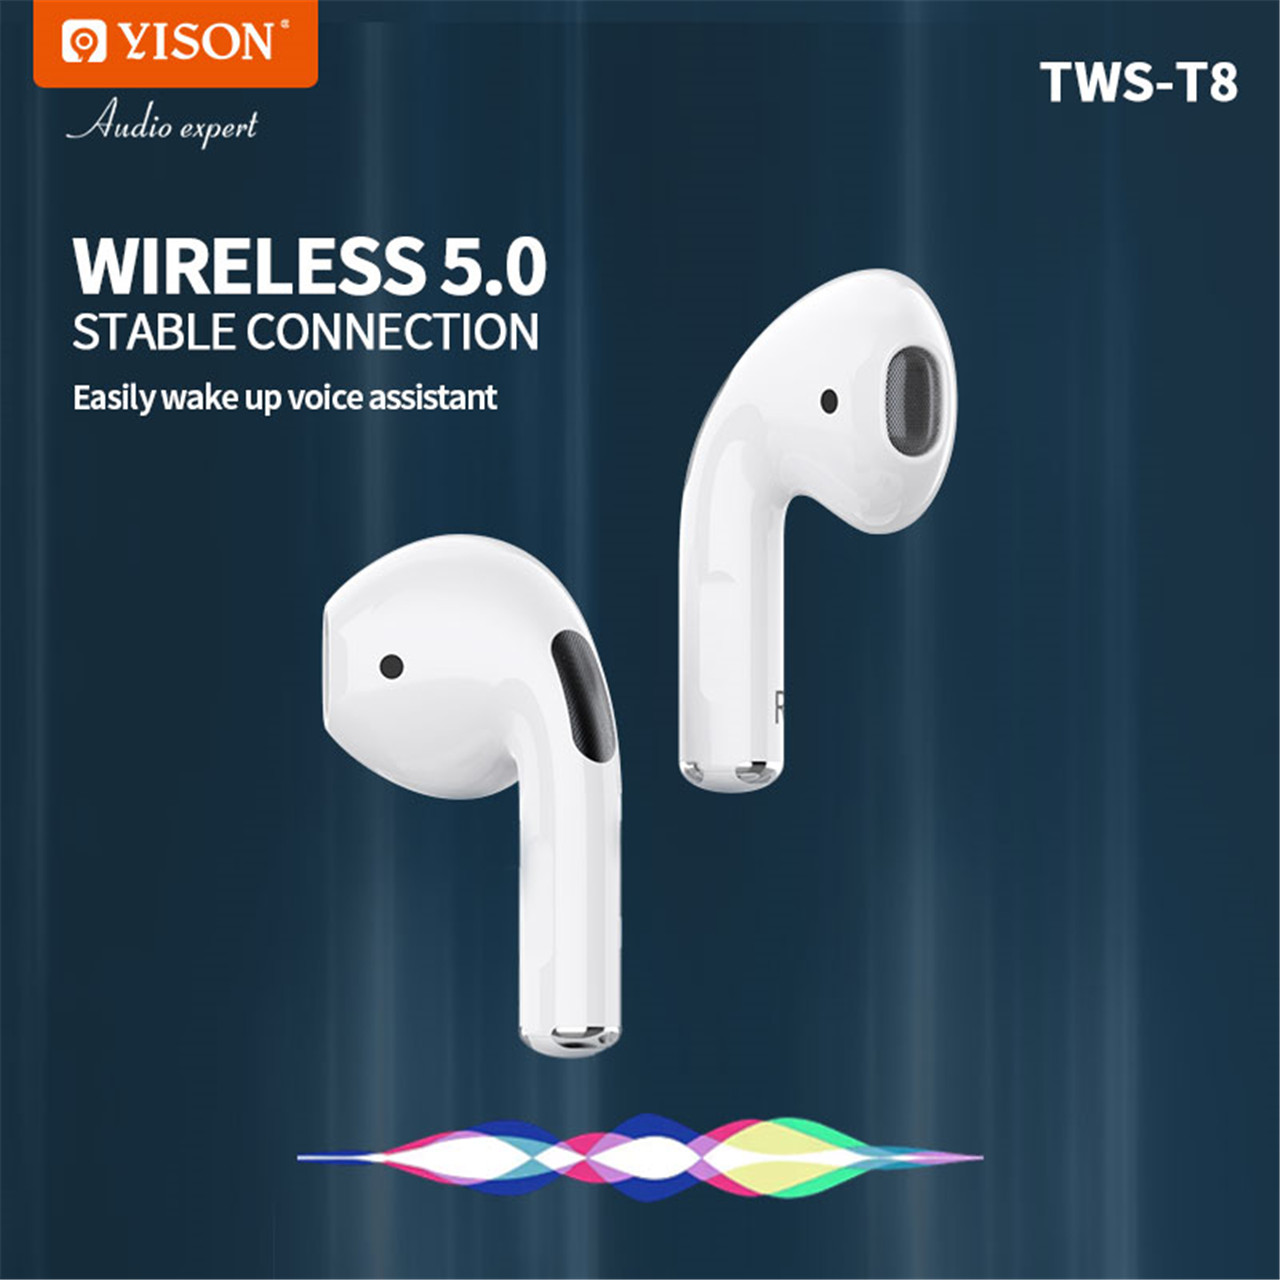 Stereo Headphones Factory –  YISON  Wholesale In-Ear Style and Wireless earphones TWS-T8   – YISON